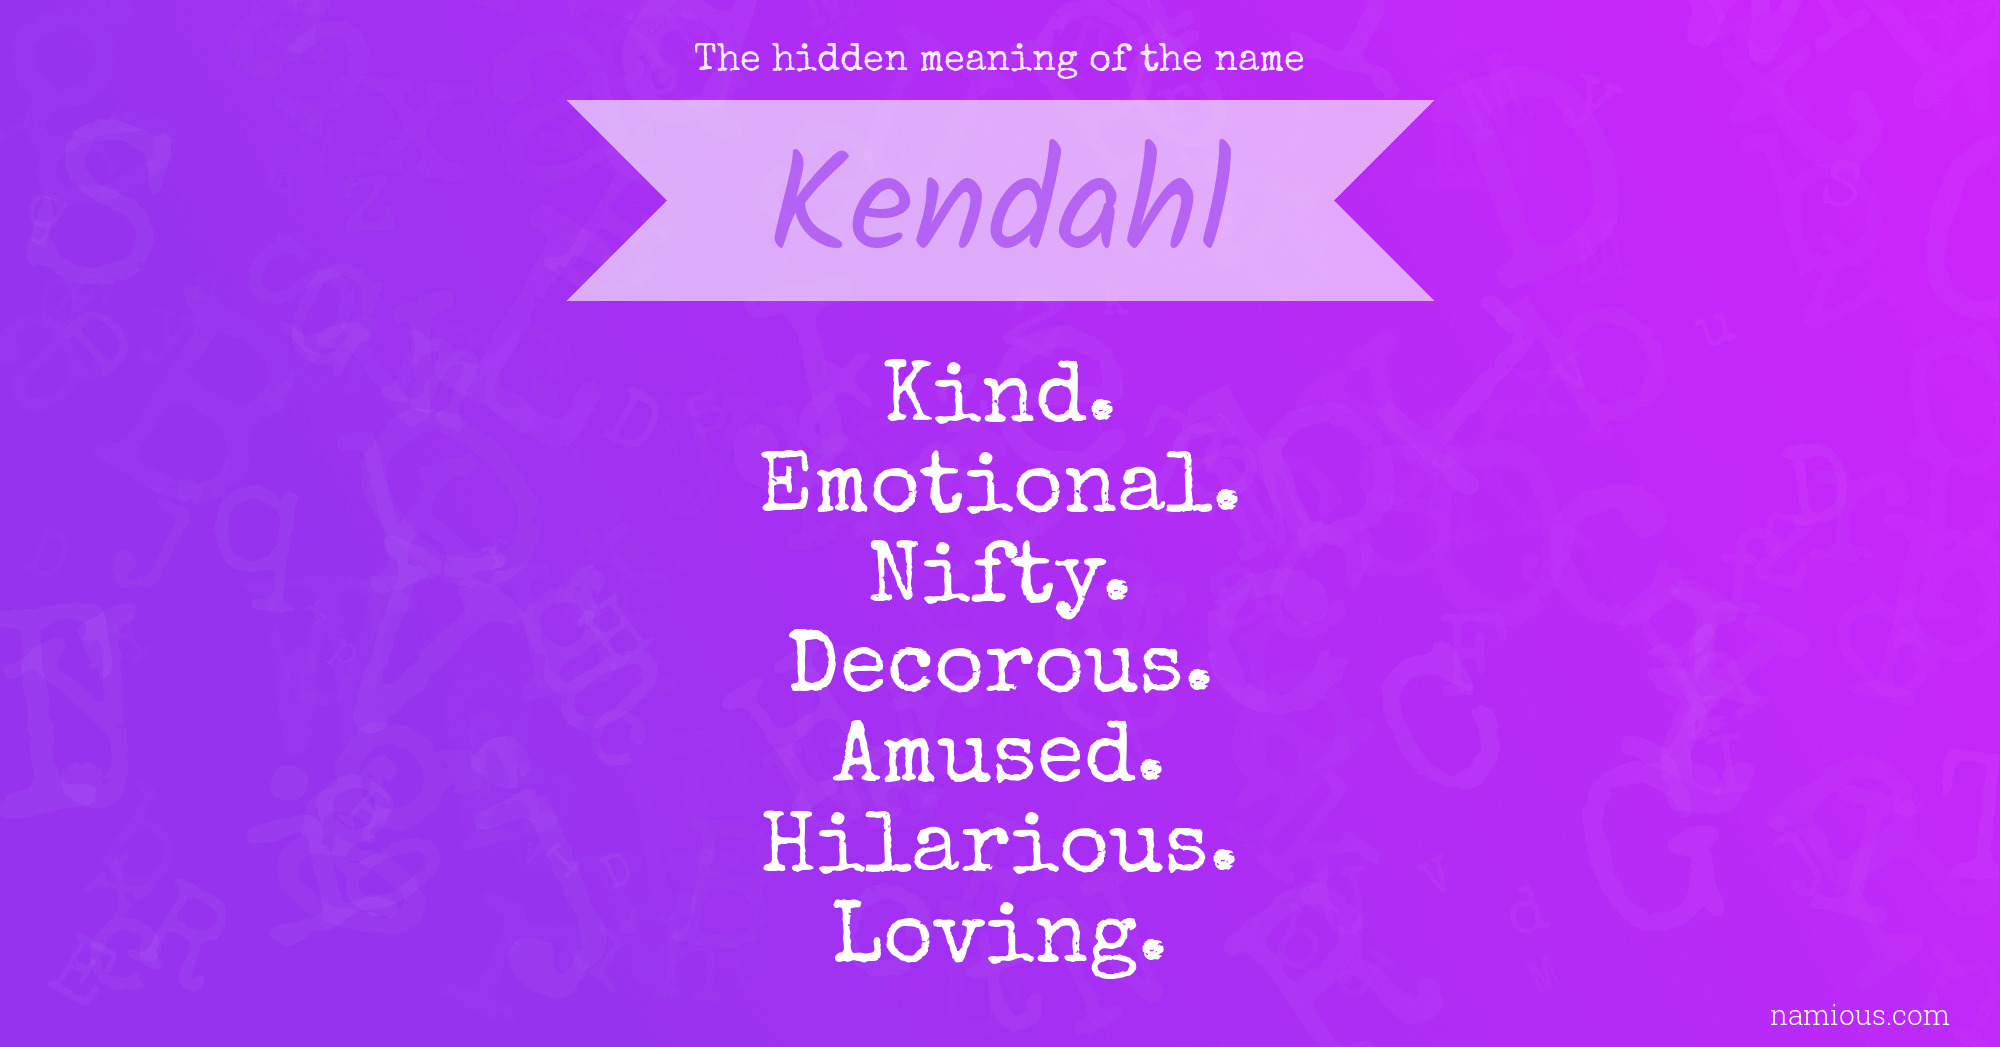 The hidden meaning of the name Kendahl